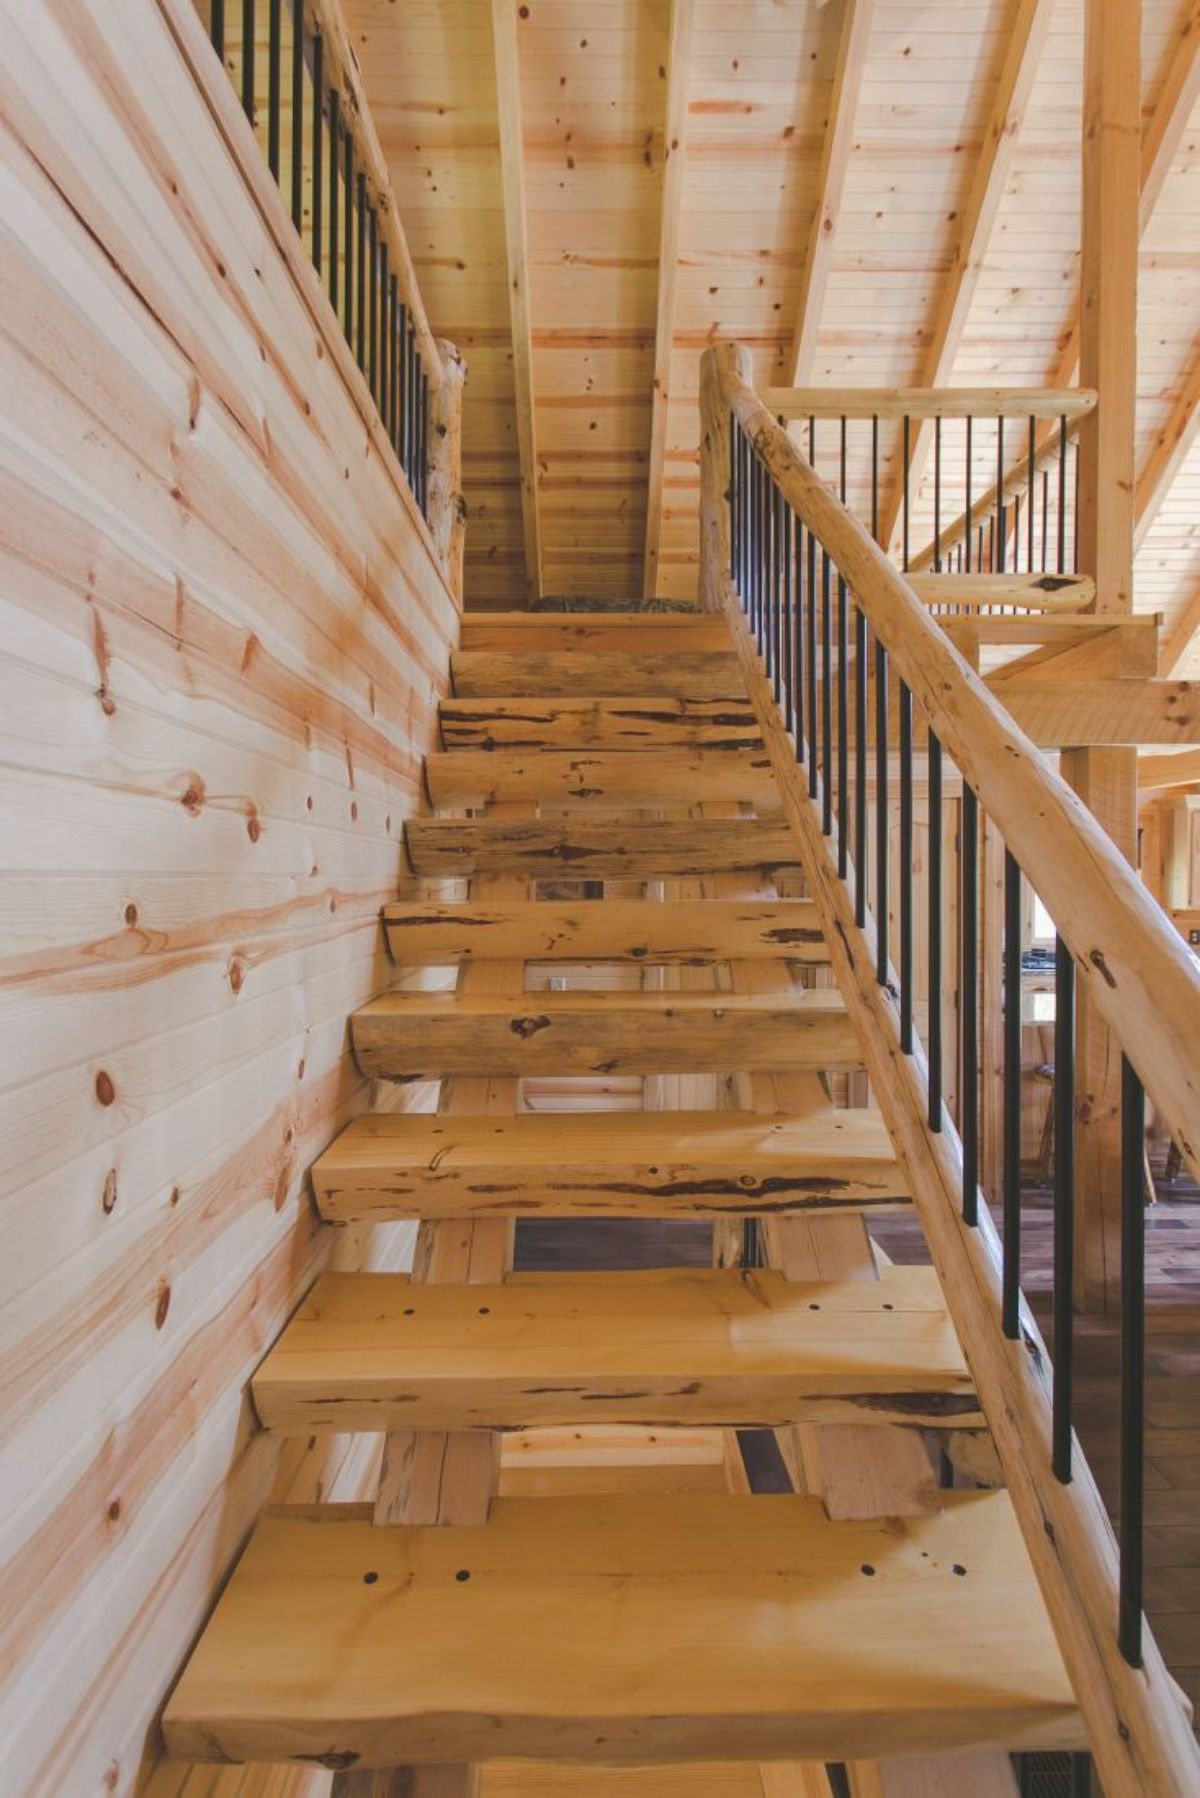 view up log stairs to loft with black spindles on rails